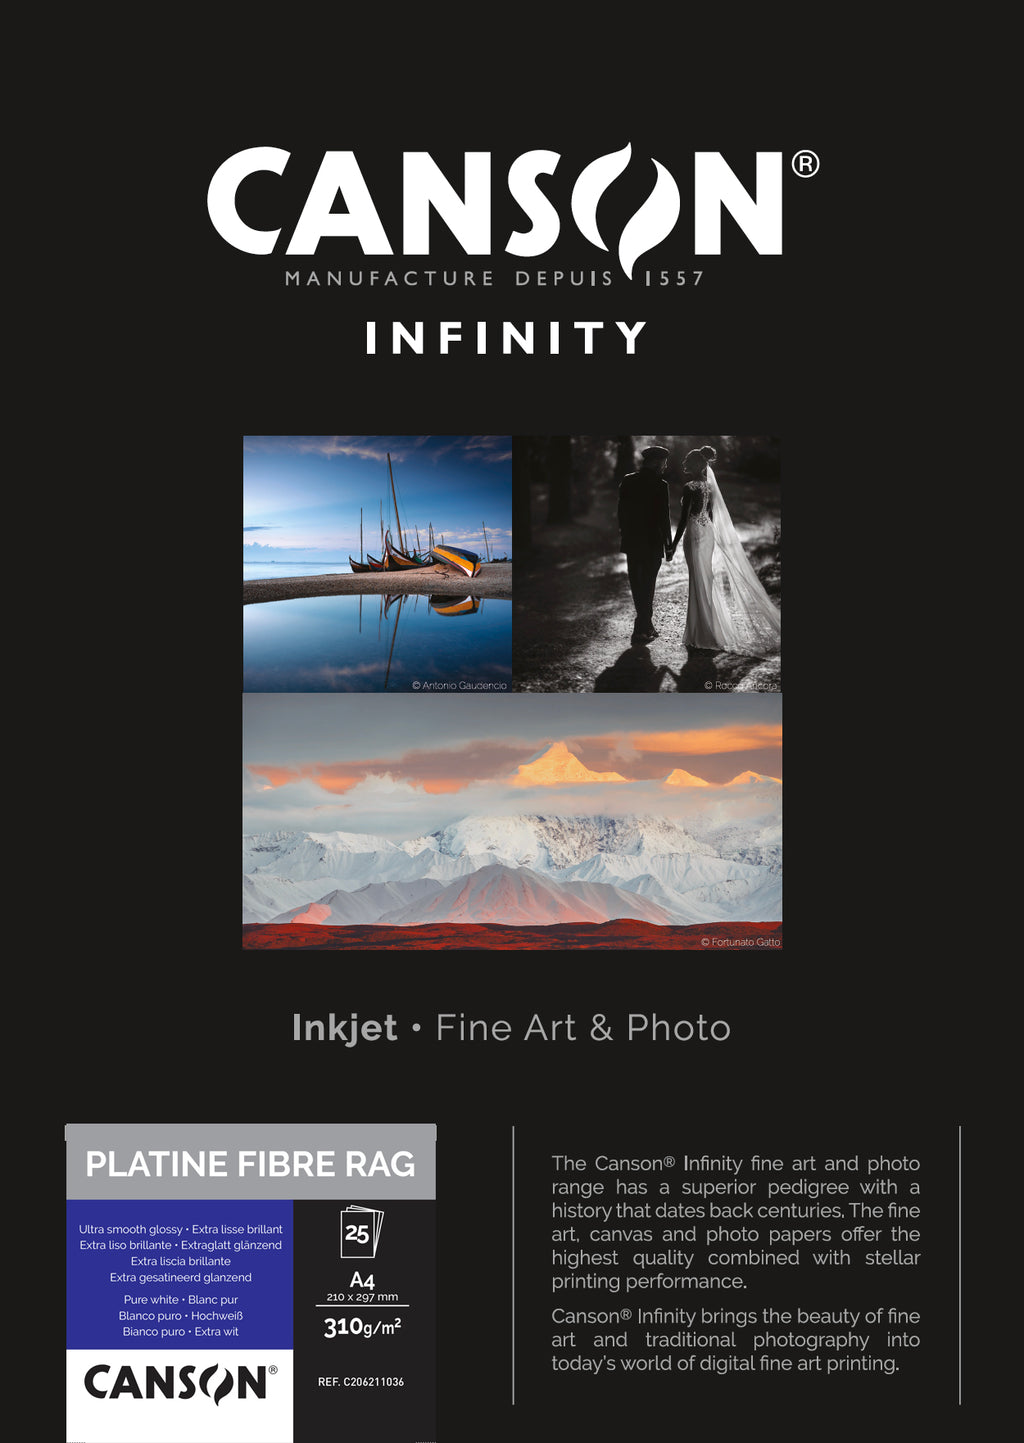 Canson Infinity Platine Fibre Rag - 310gsm - A4 (25 sheets)